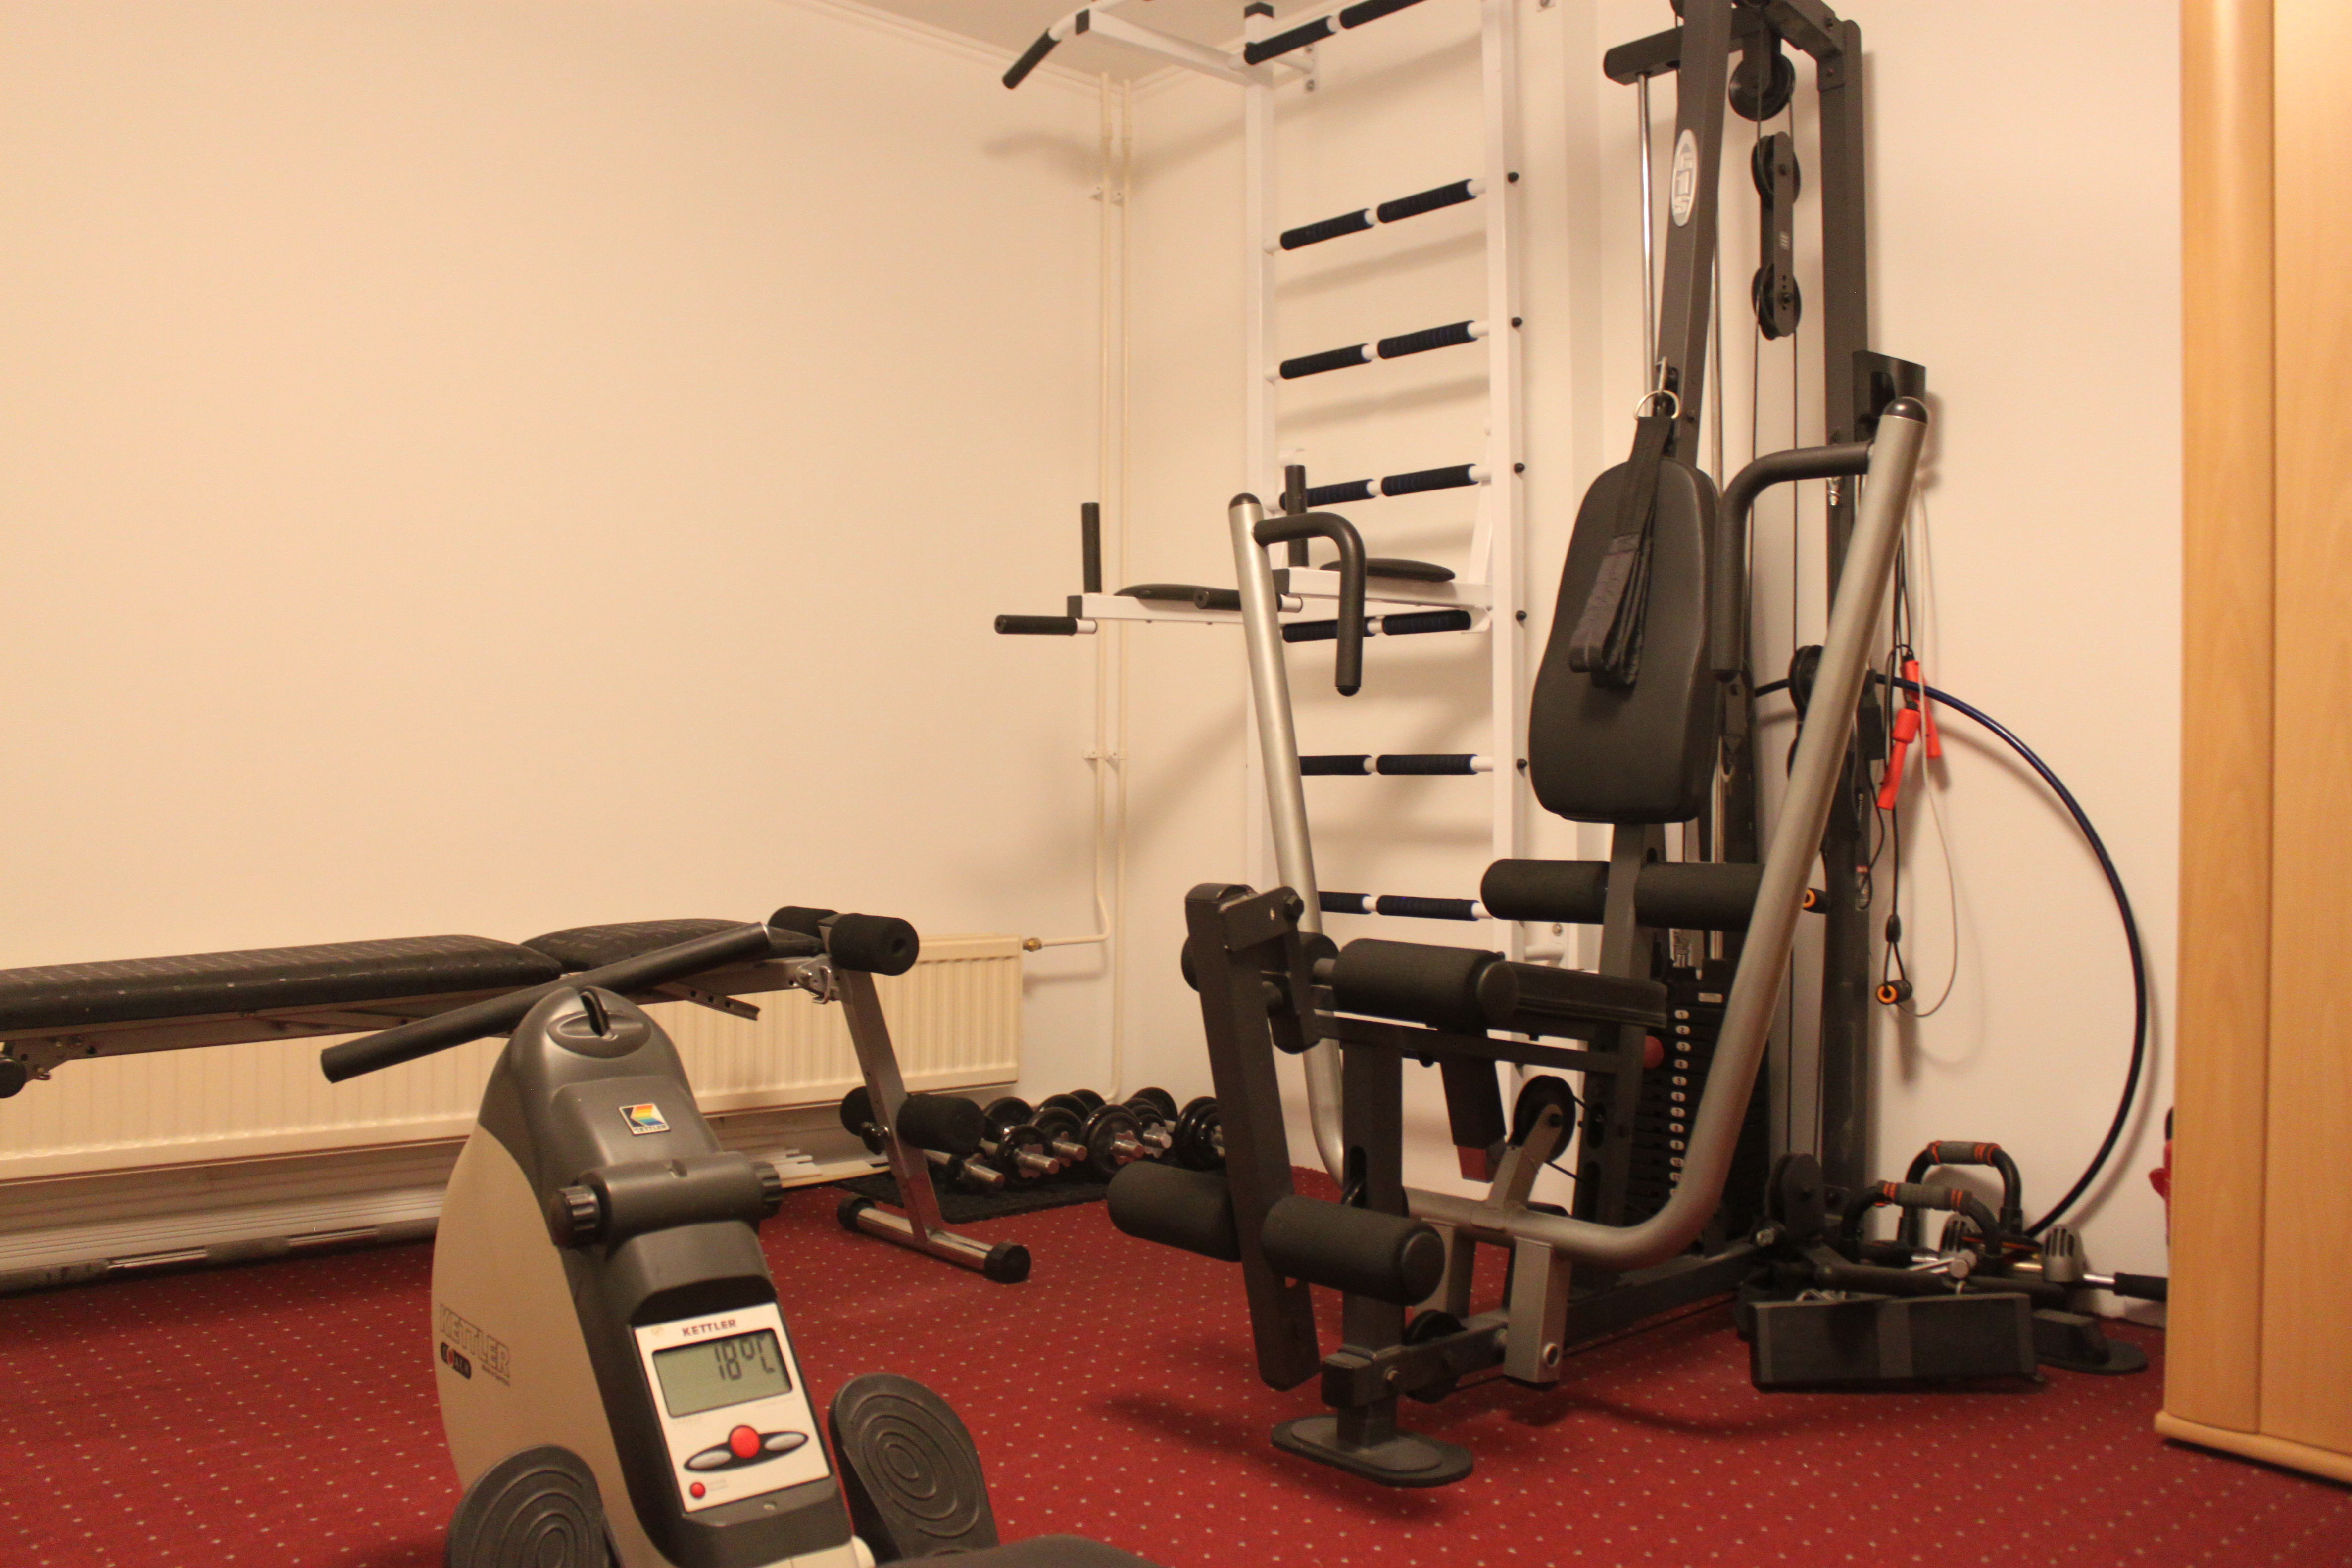 Our fitness room